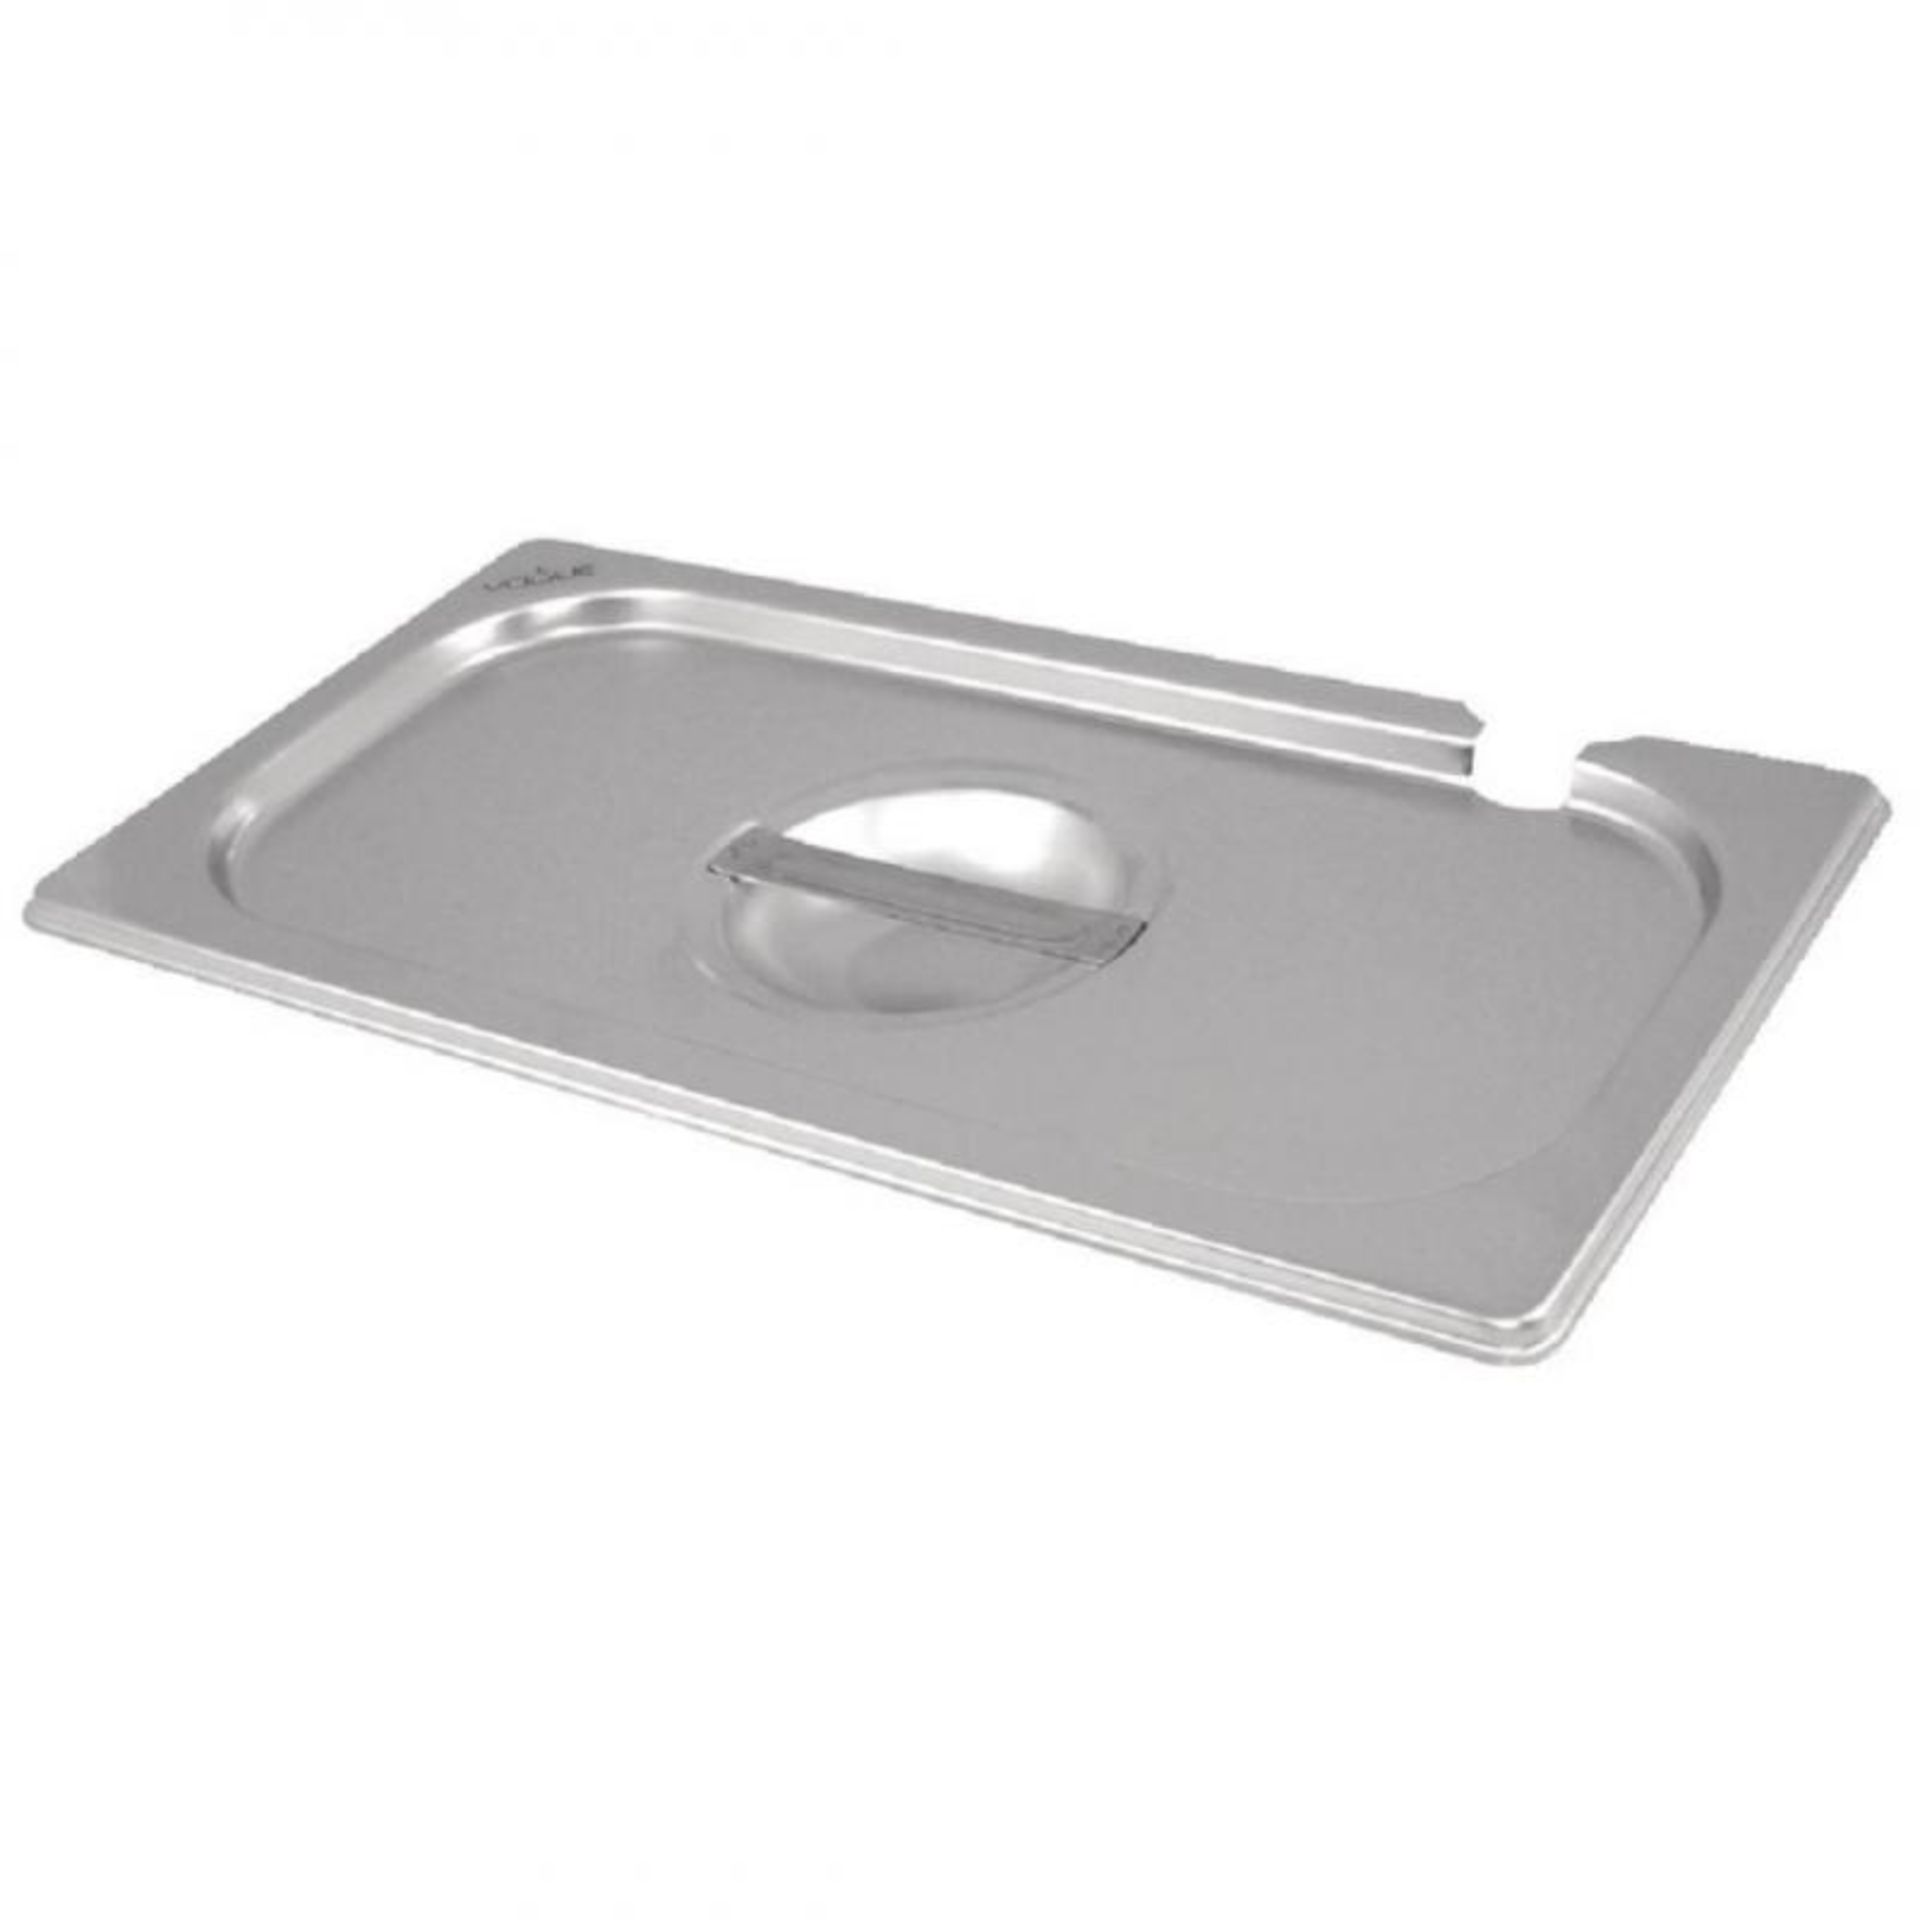 5 x Vogue K934 Stainless Steel 1/3 150mm Gastronorm Pans With Lids - Brand New - Location: Bolton BL - Image 2 of 2